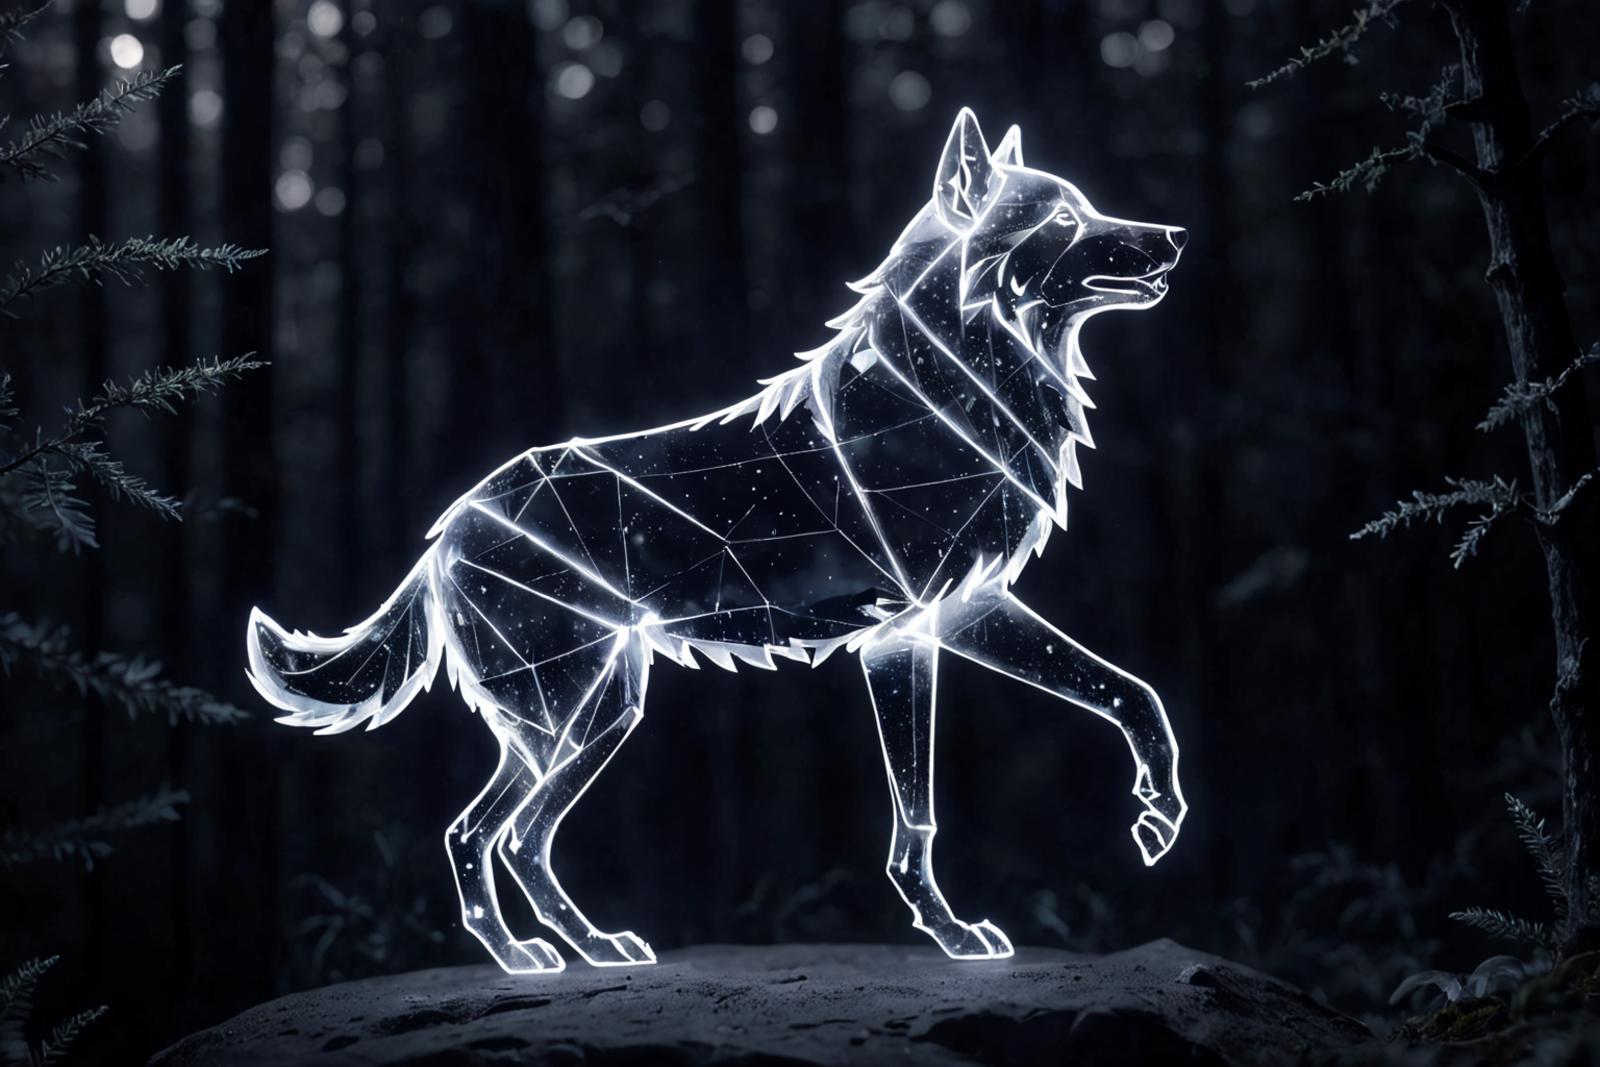 A Wolf-Shaped Lamp Post in the Woods